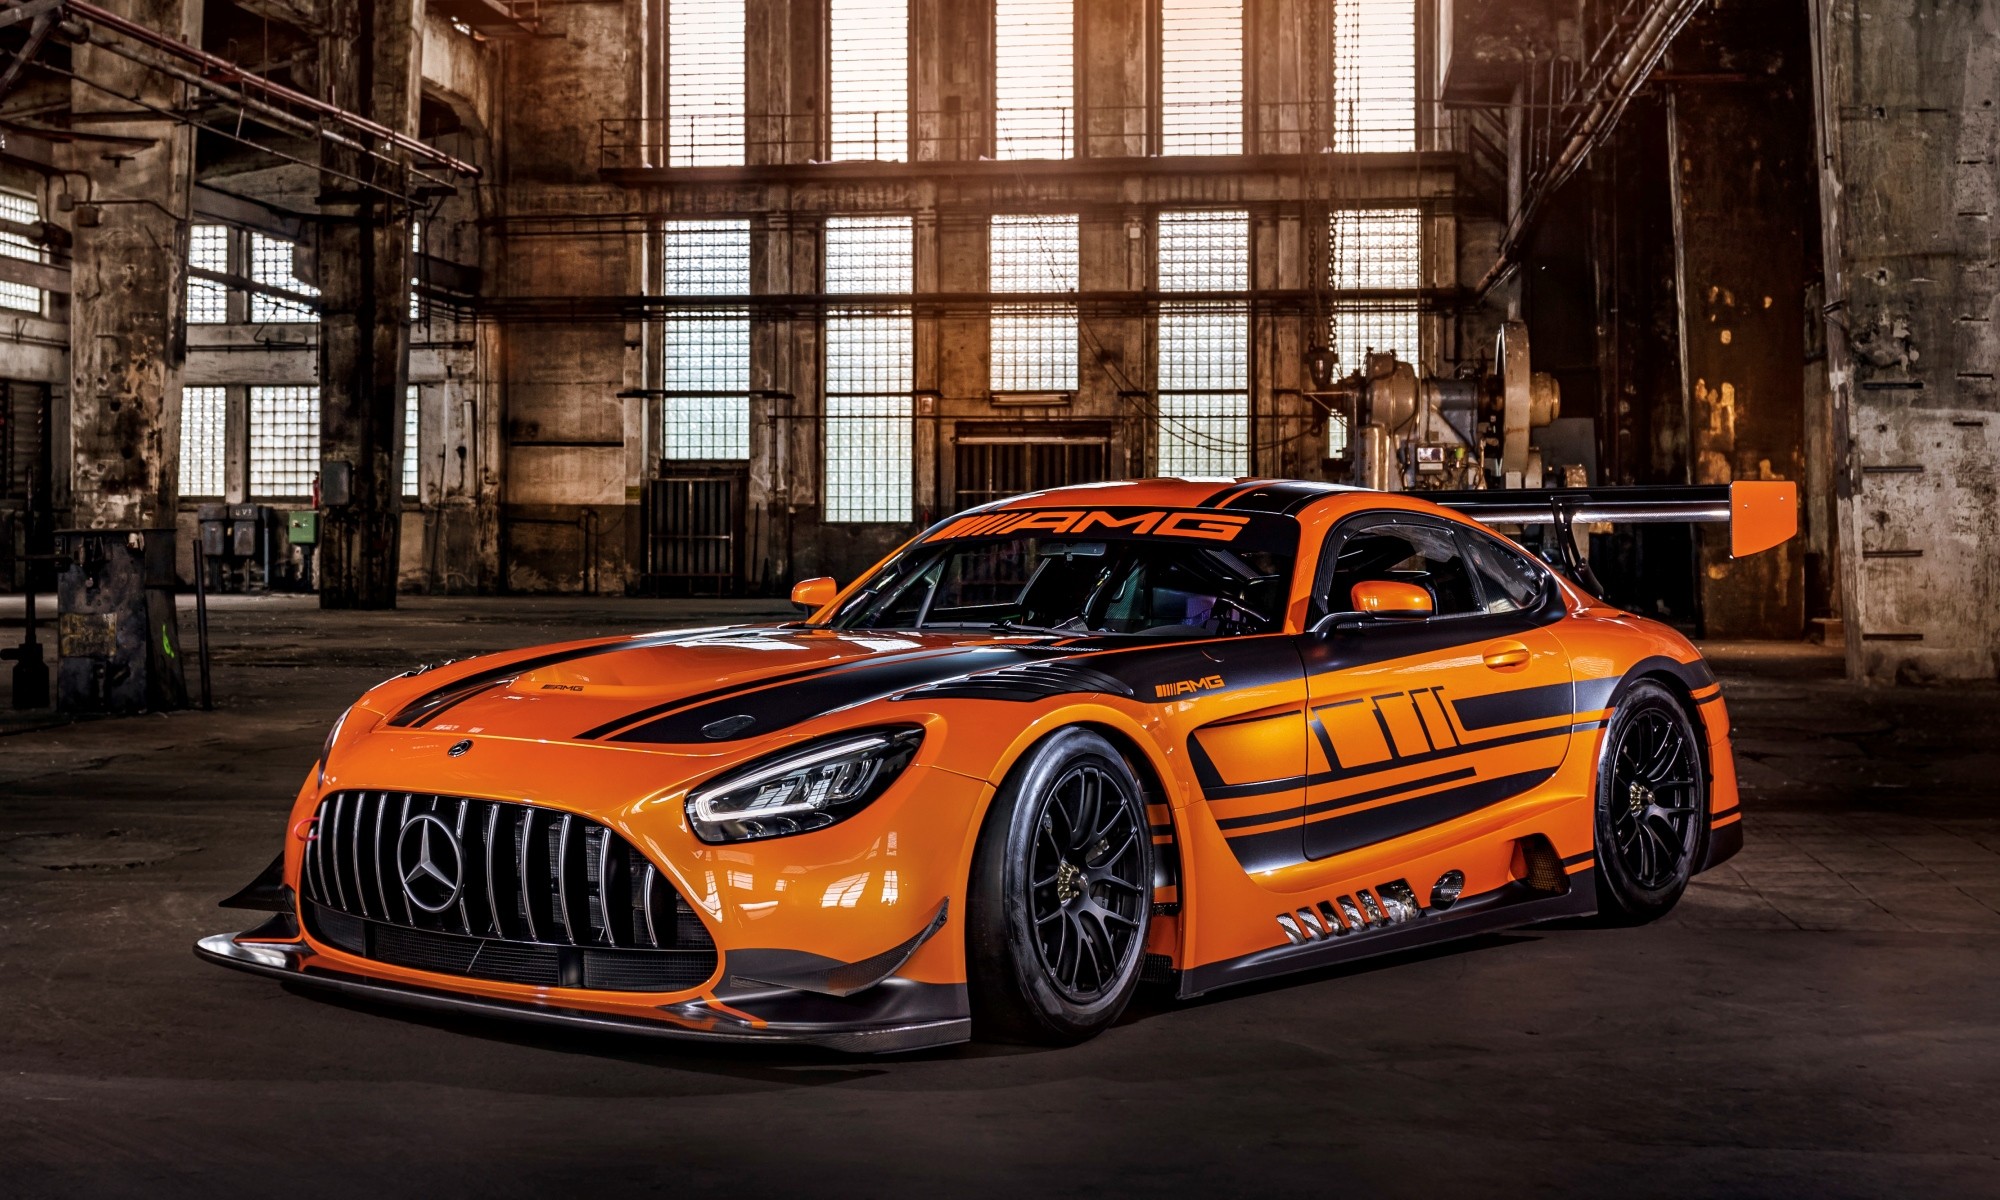 Mercedes AMG GT3 is a customer racecar from Mercedes AMG